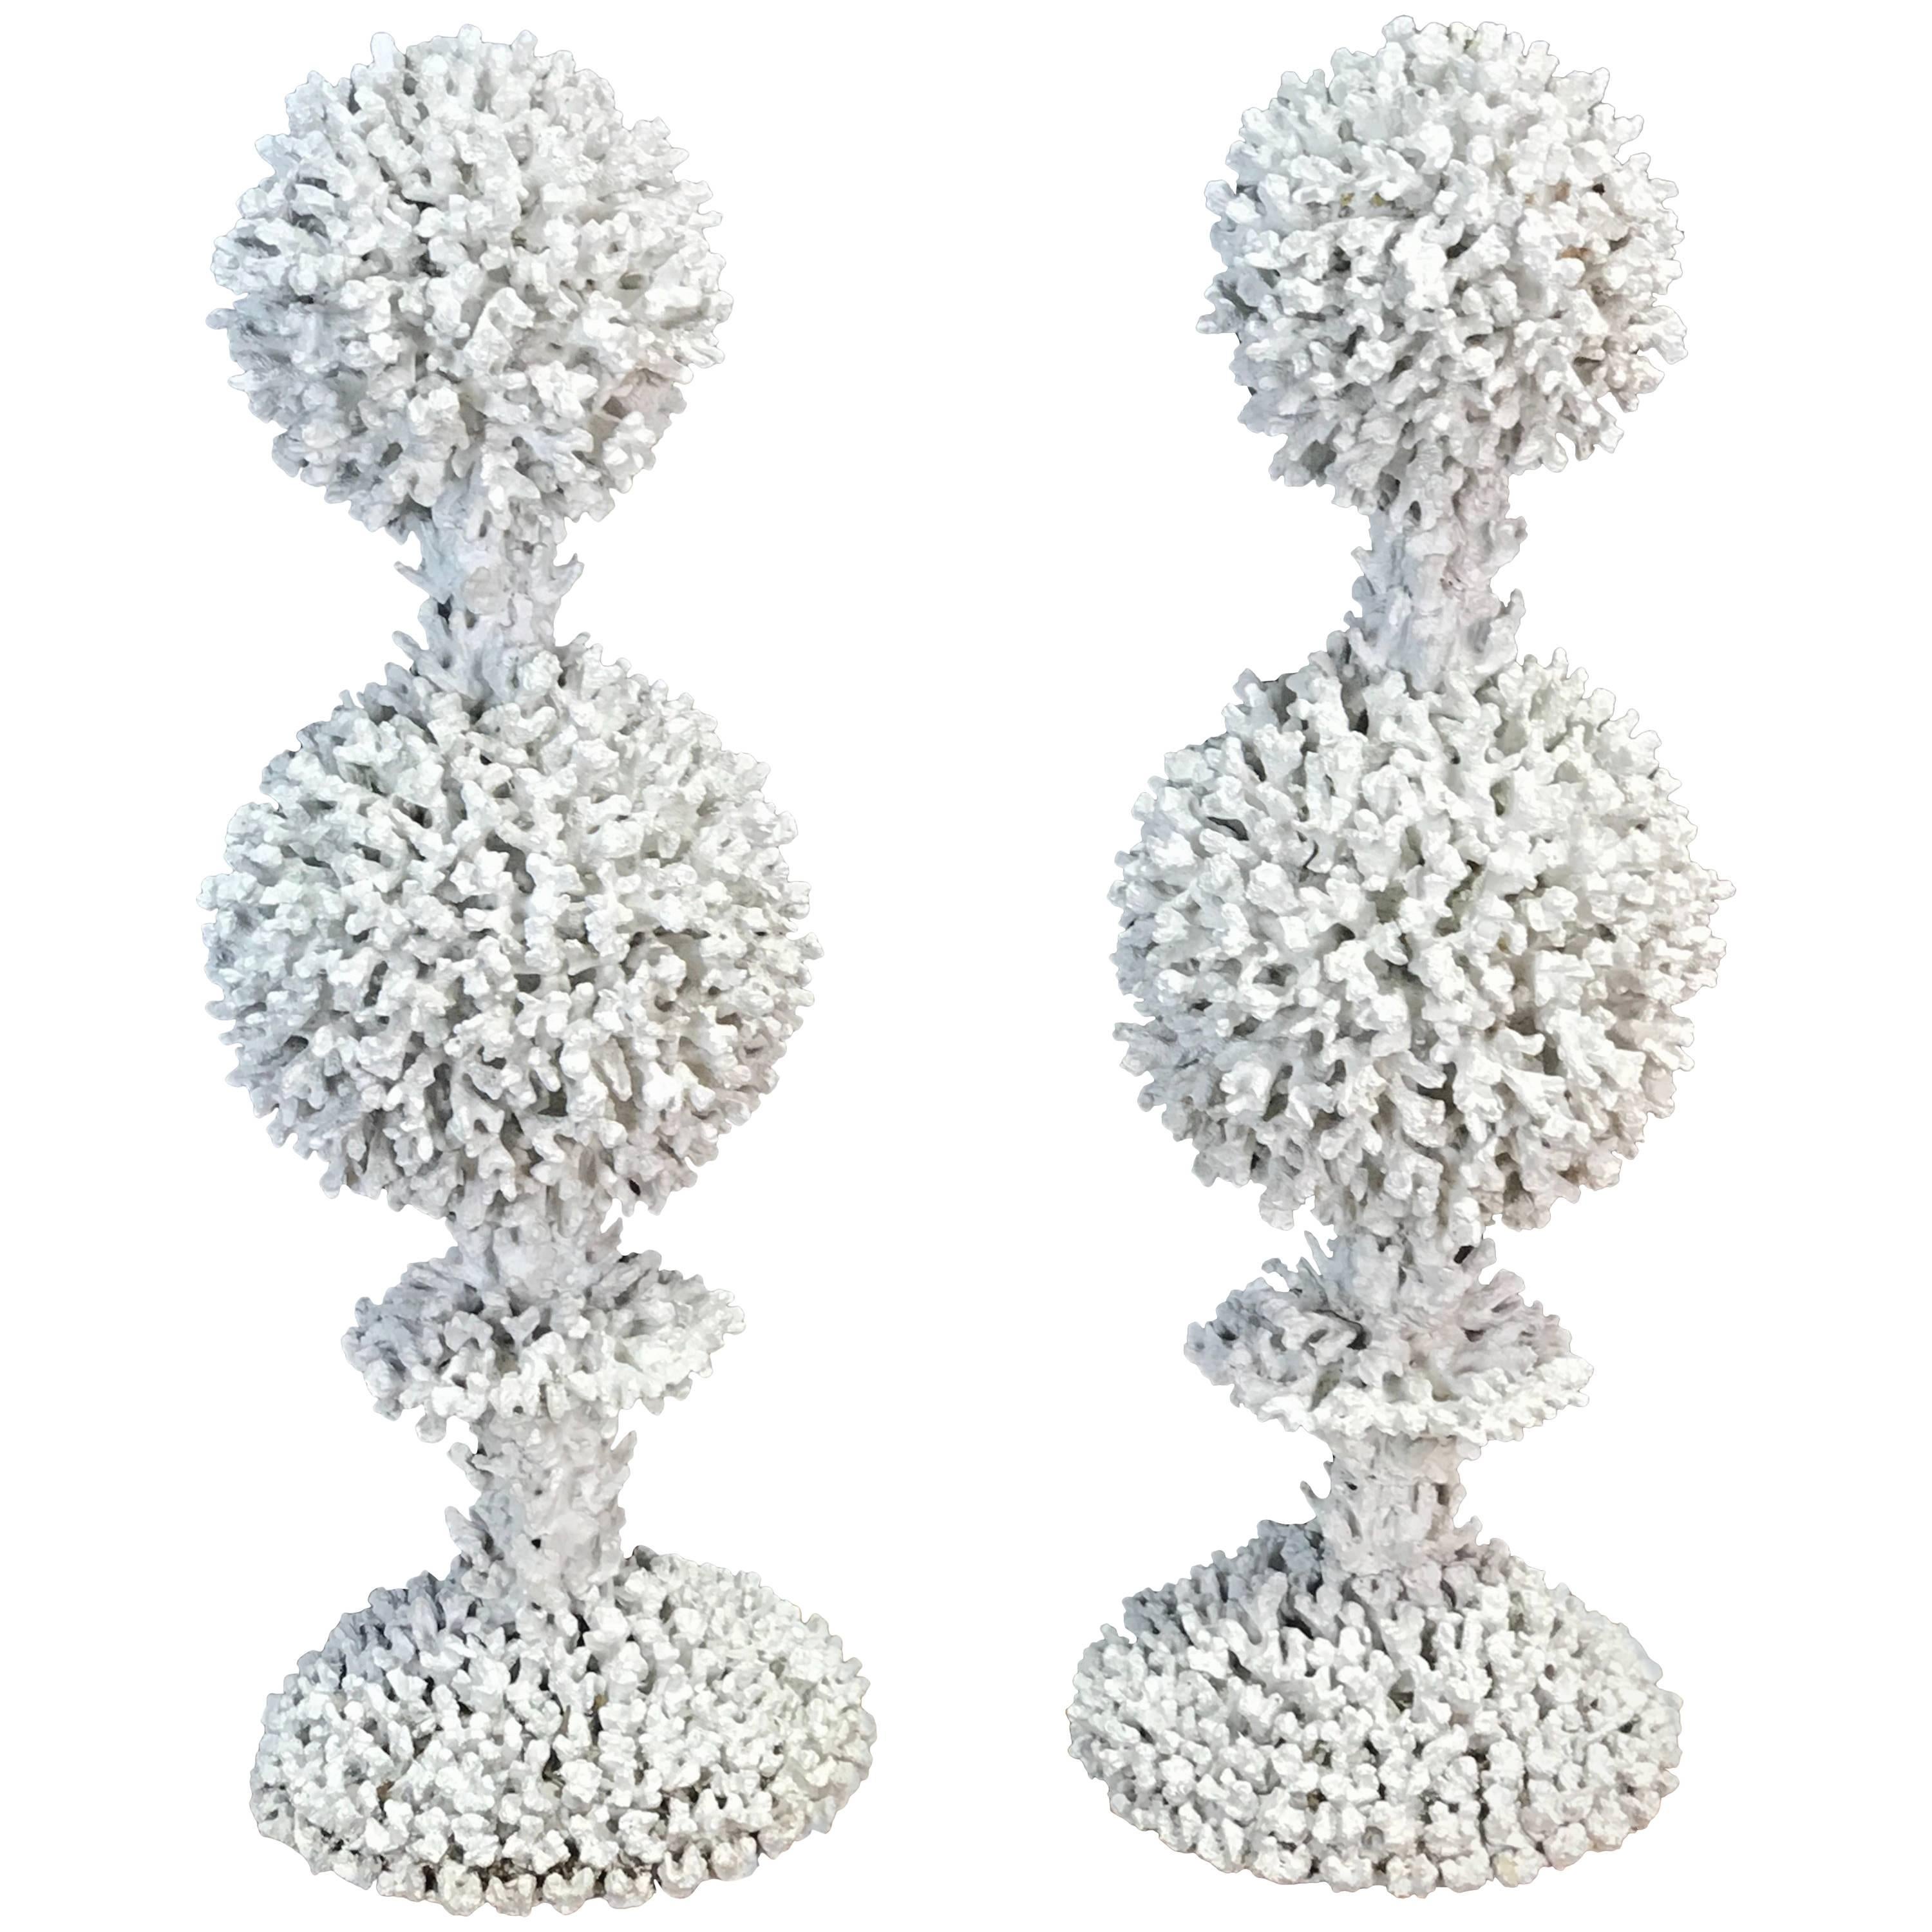 Pair of French White "Branch Coral" Topiaries